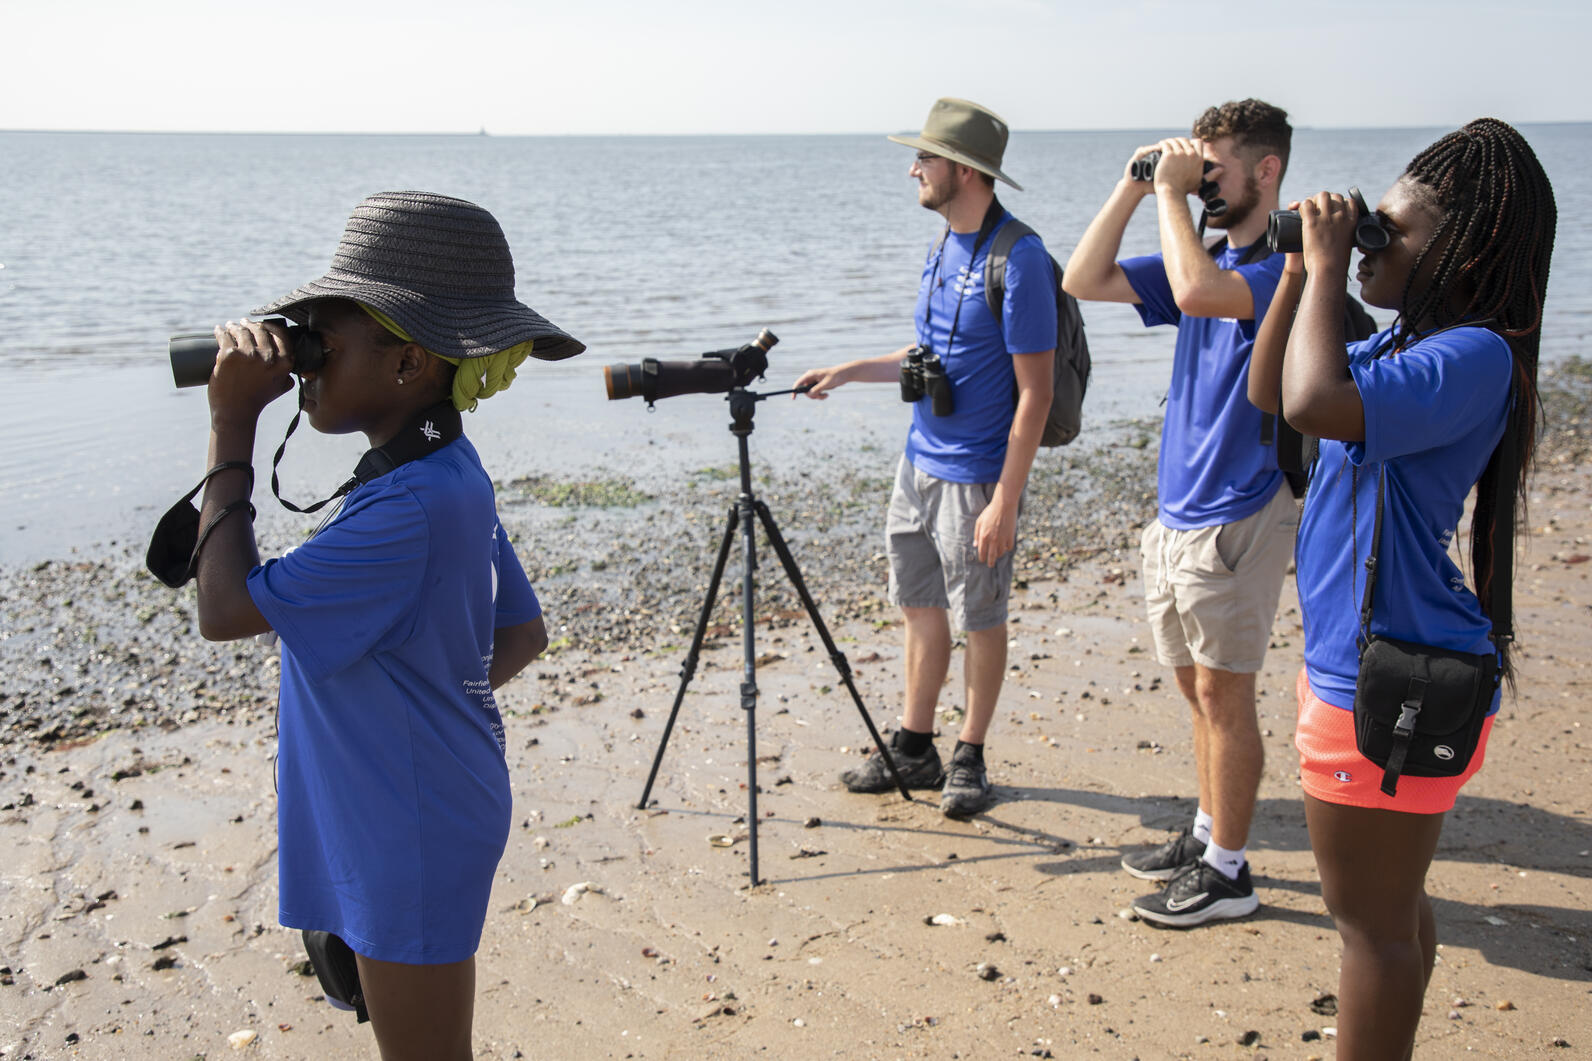 A group of young adults in matching blue work shirts stand on the beach, using binoculars to look at something in the distance towards the shoreline.